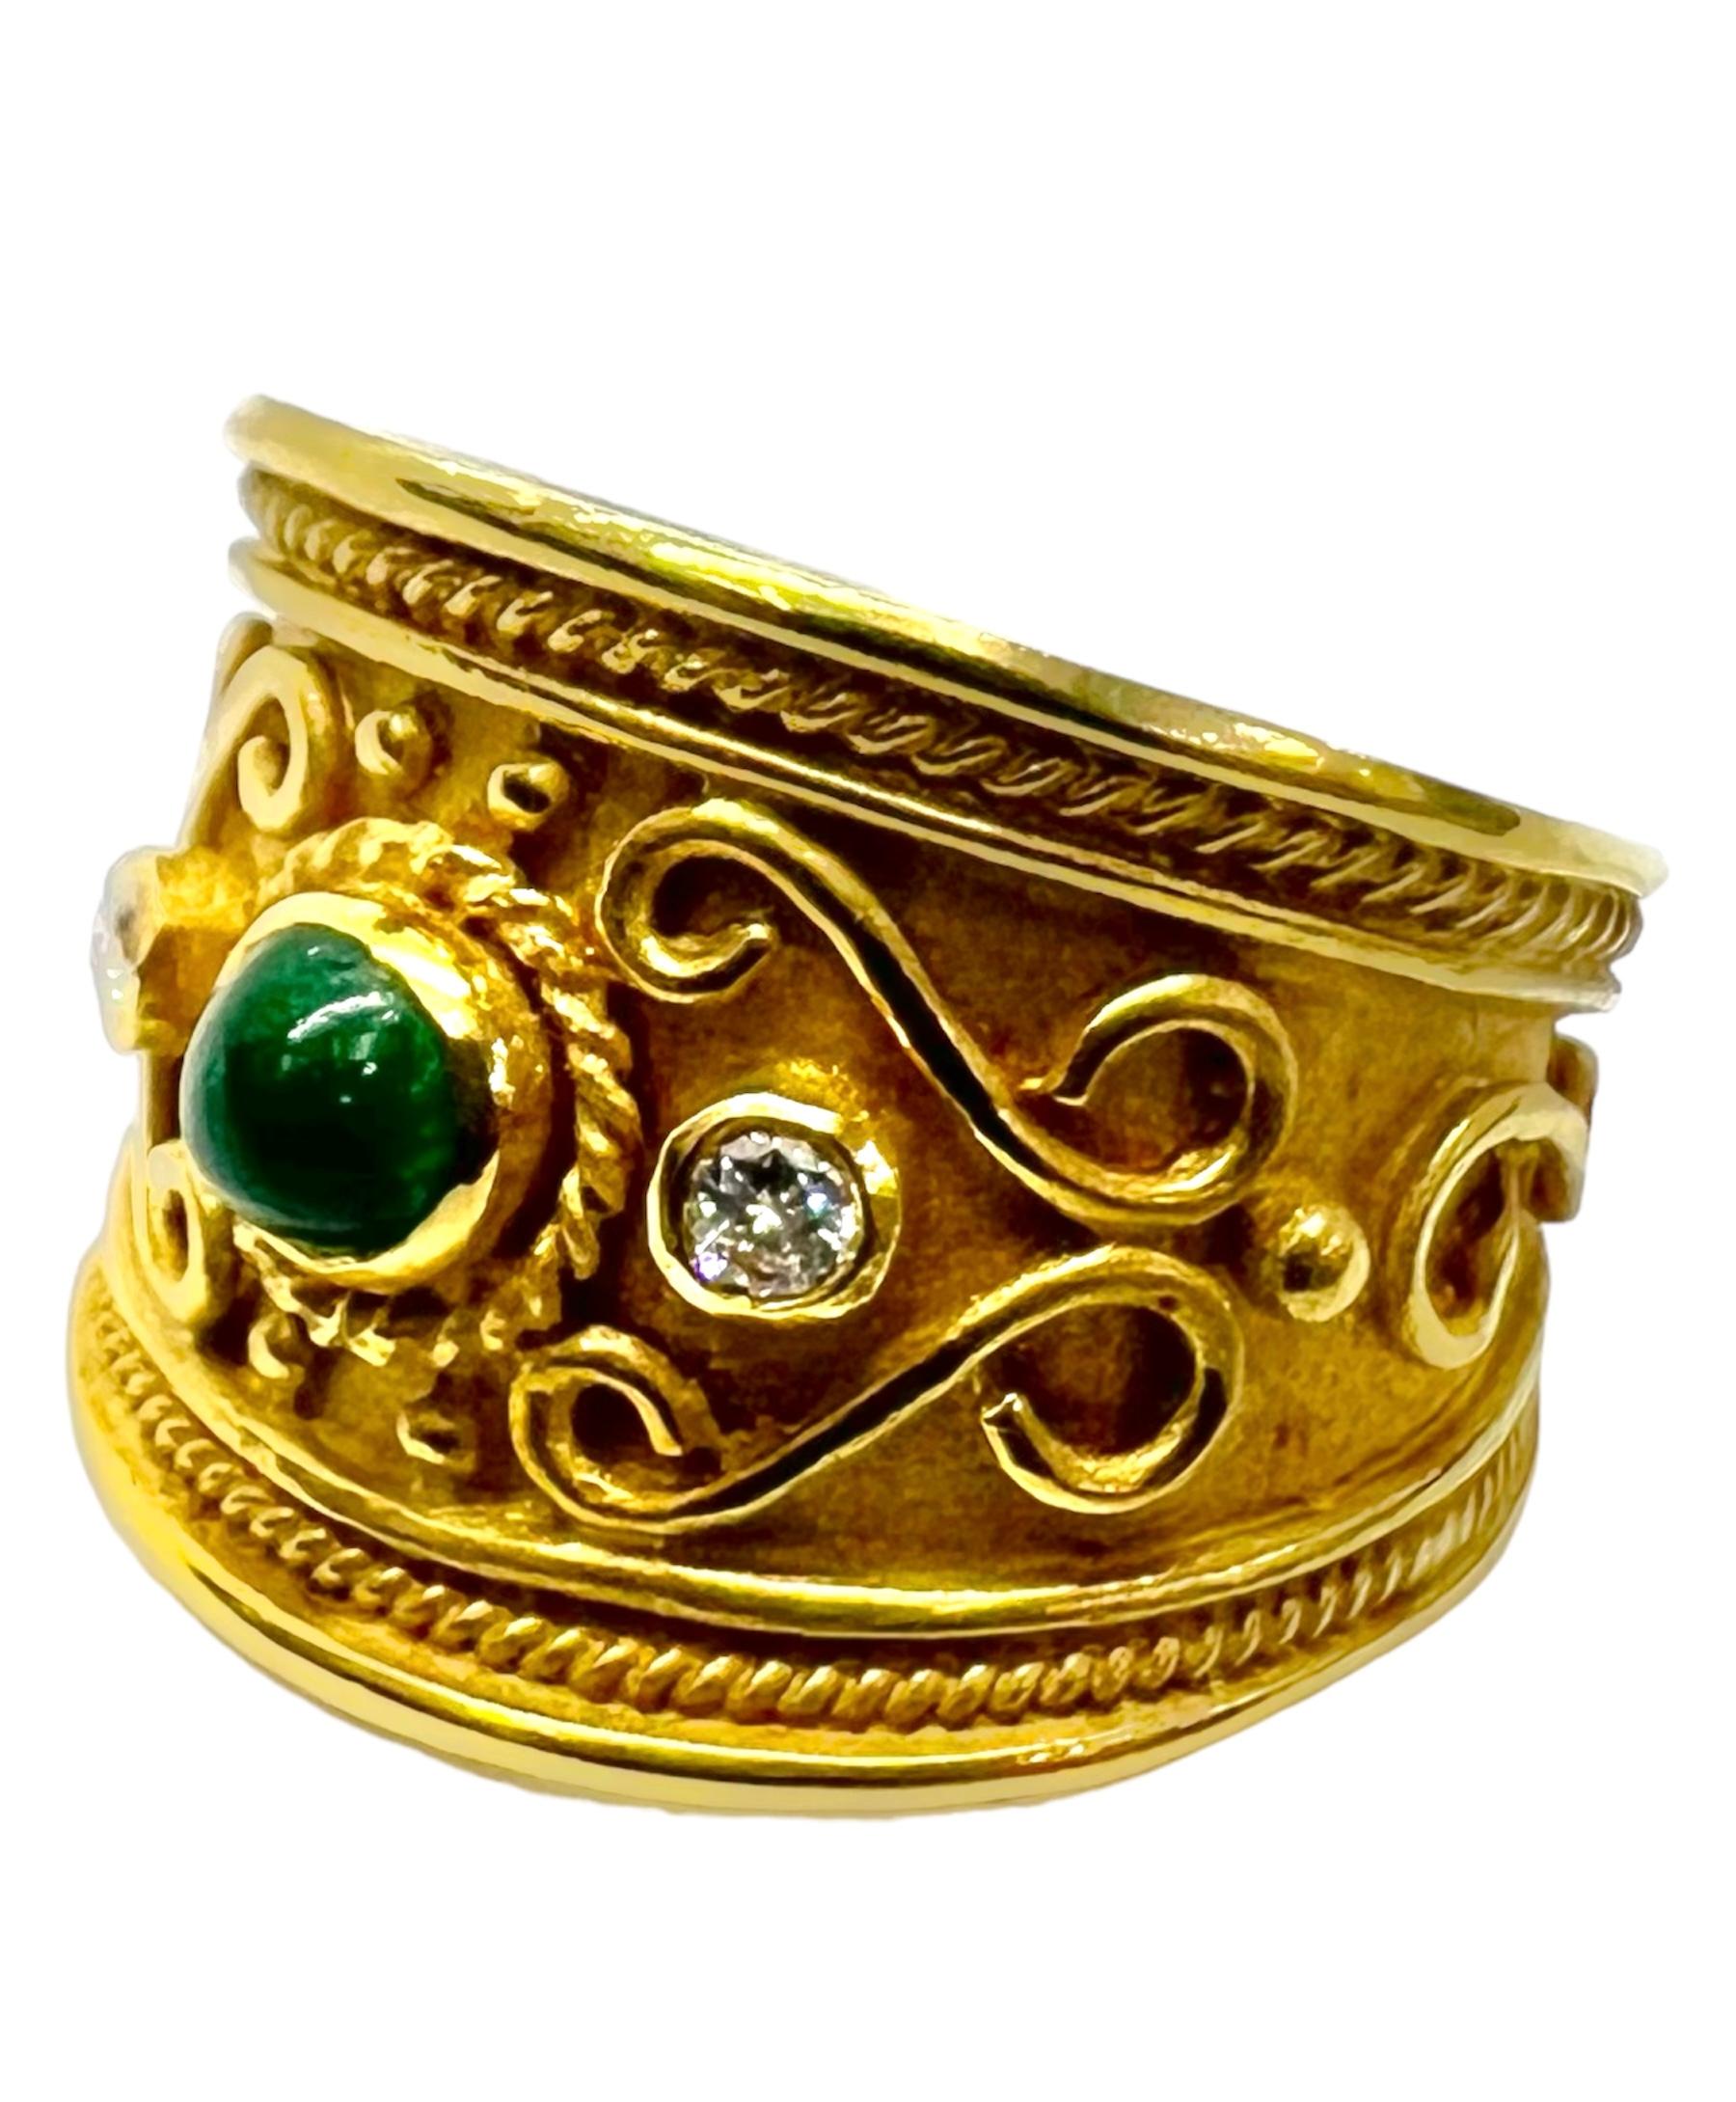 18K yellow gold ring with emerald and diamonds.

Sophia D by Joseph Dardashti LTD has been known worldwide for 35 years and are inspired by classic Art Deco design that merges with modern manufacturing techniques.  